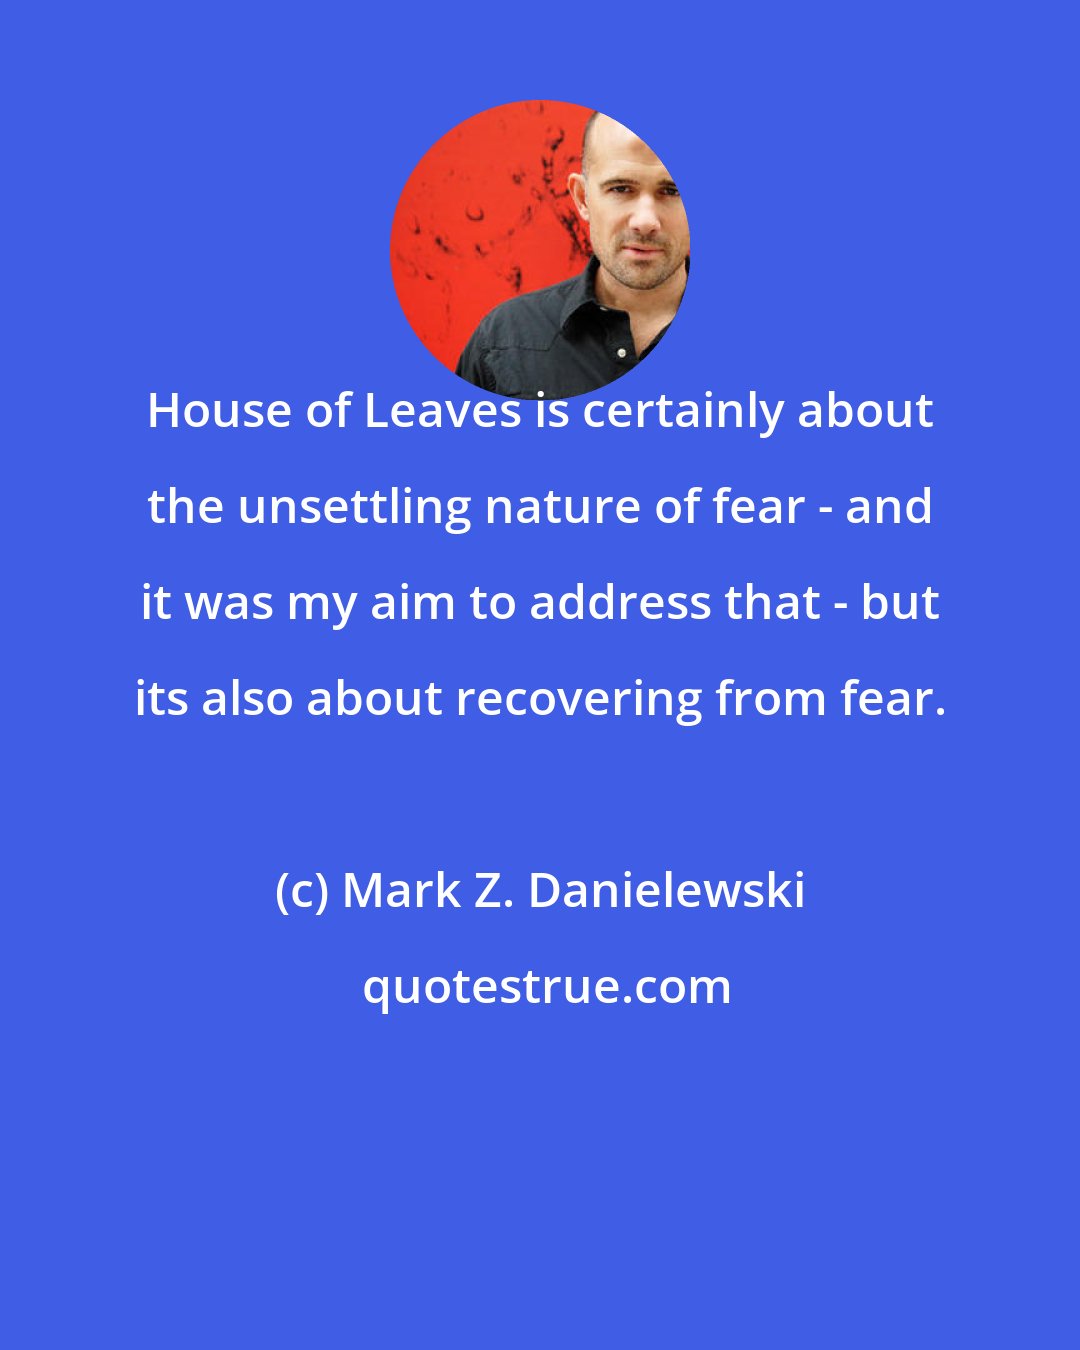 Mark Z. Danielewski: House of Leaves is certainly about the unsettling nature of fear - and it was my aim to address that - but its also about recovering from fear.